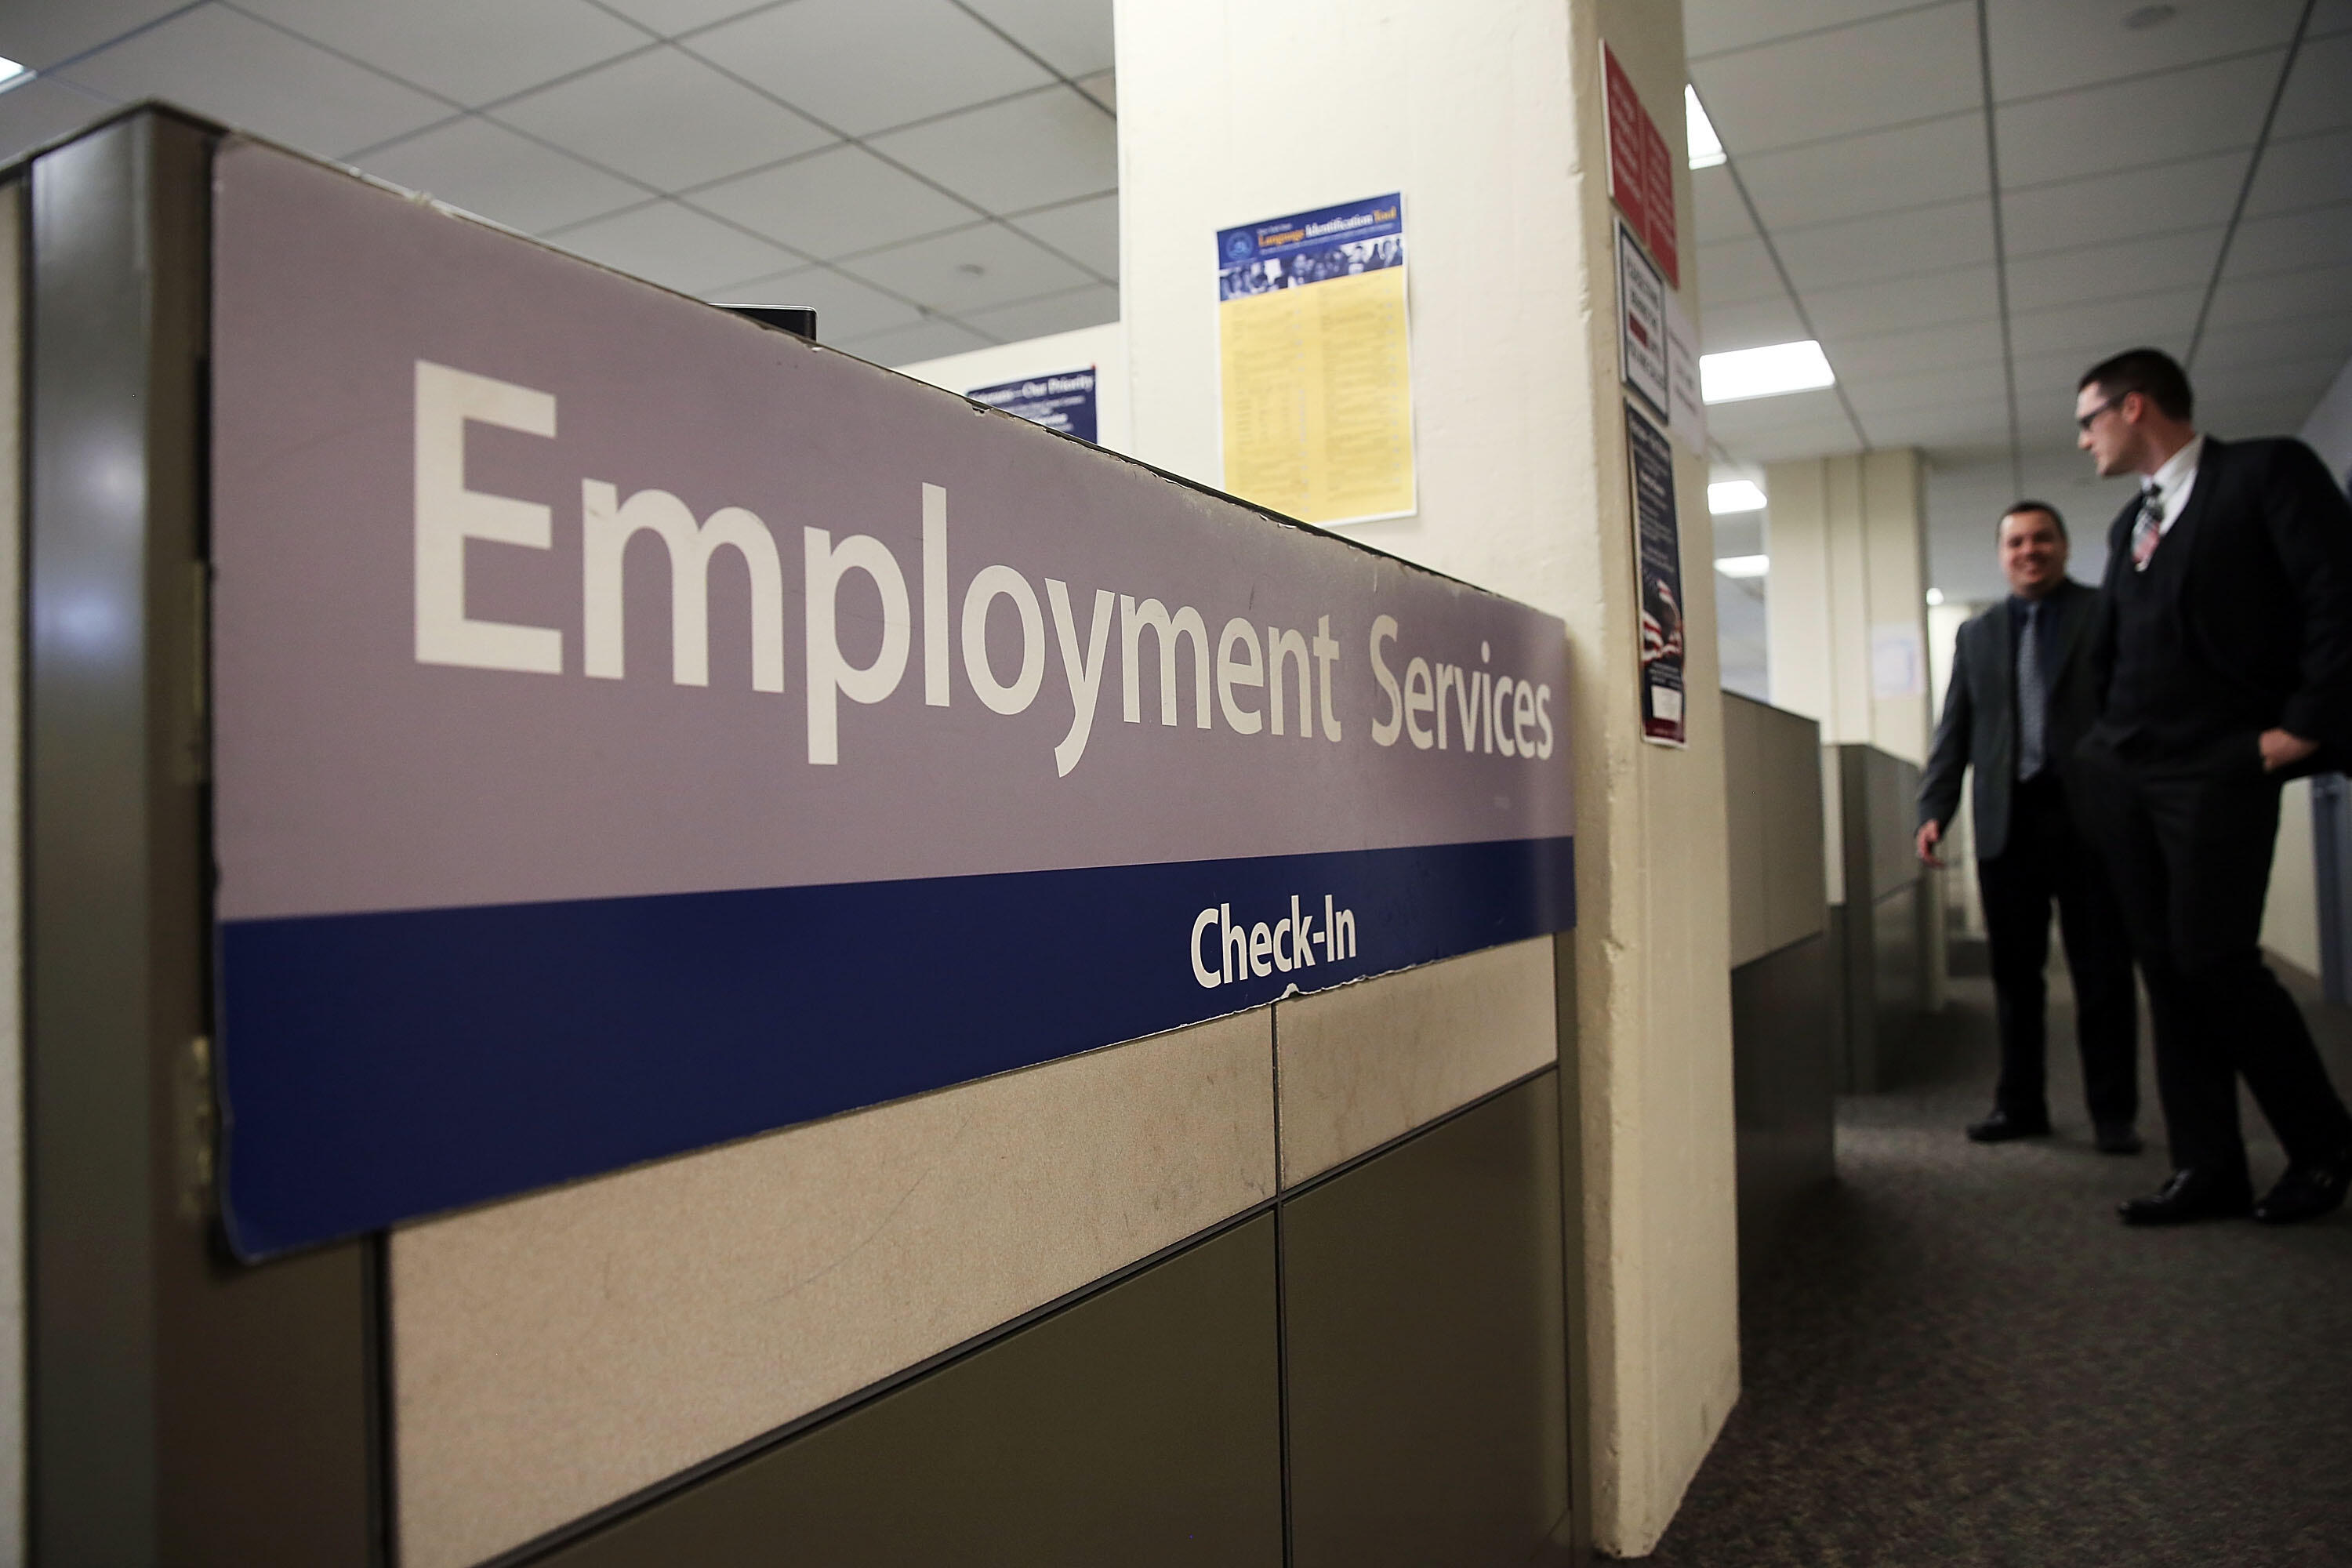 NEW YORK, NY - MARCH 06: A New York Labor Department office is viewed in Manhattan on March 6, 2015 in New York City. Beating expectations, the Labor Department reported on Friday that employers added 295,000 workers in February. The robust numbers brough